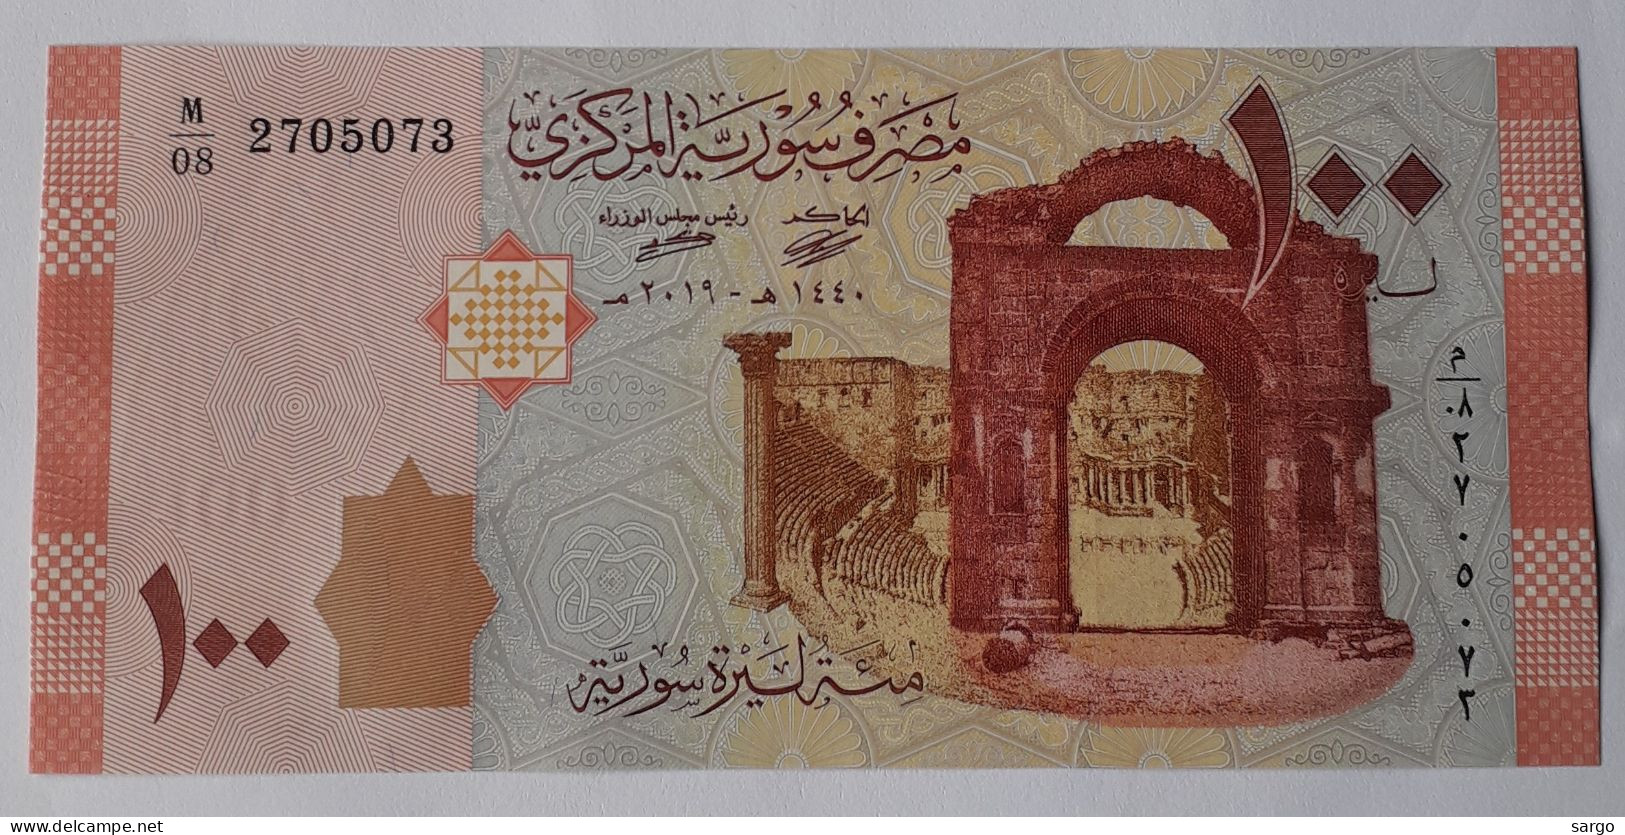 SYRIA  - 100 POUND - P 113b  (2019) - UNC -  BANKNOTES - PAPER MONEY - Syrie